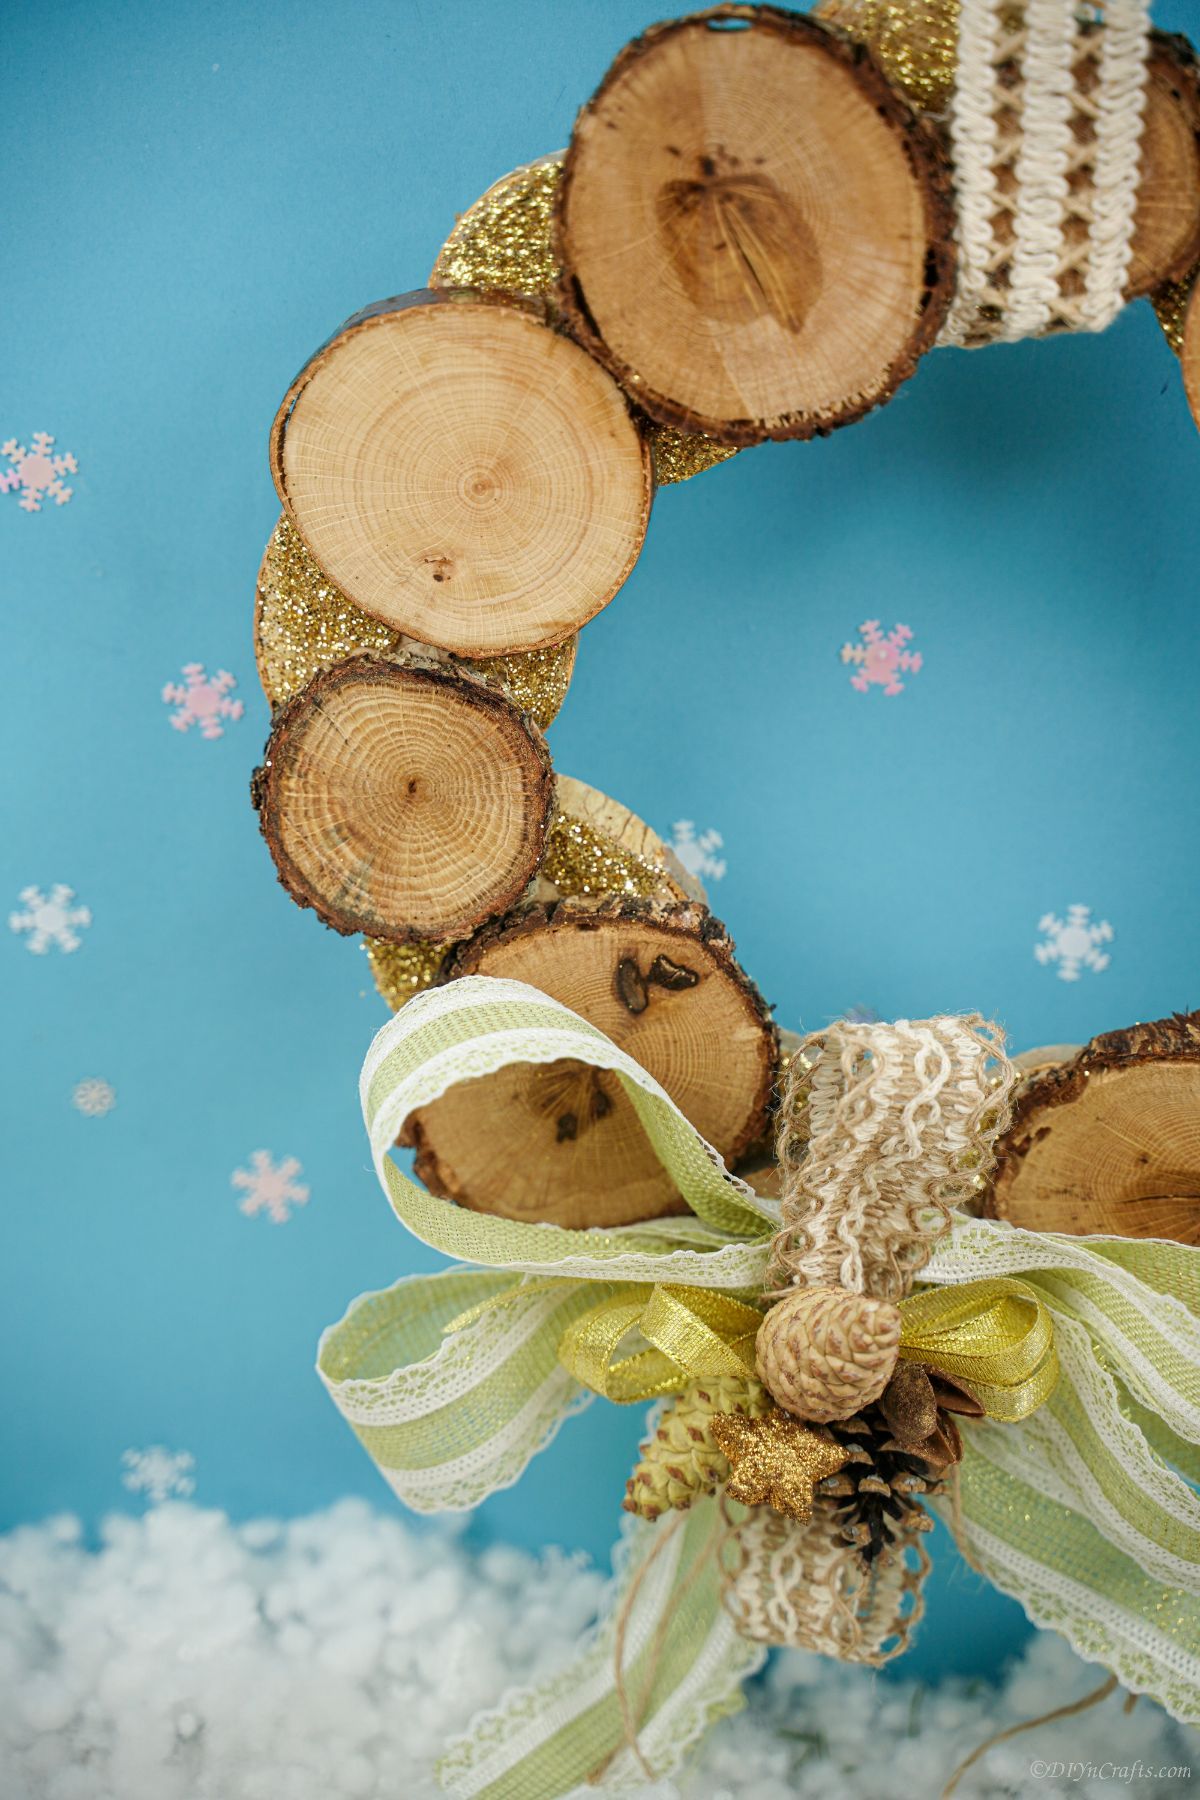 sideo f wreath with wood slice and green bow on blue background